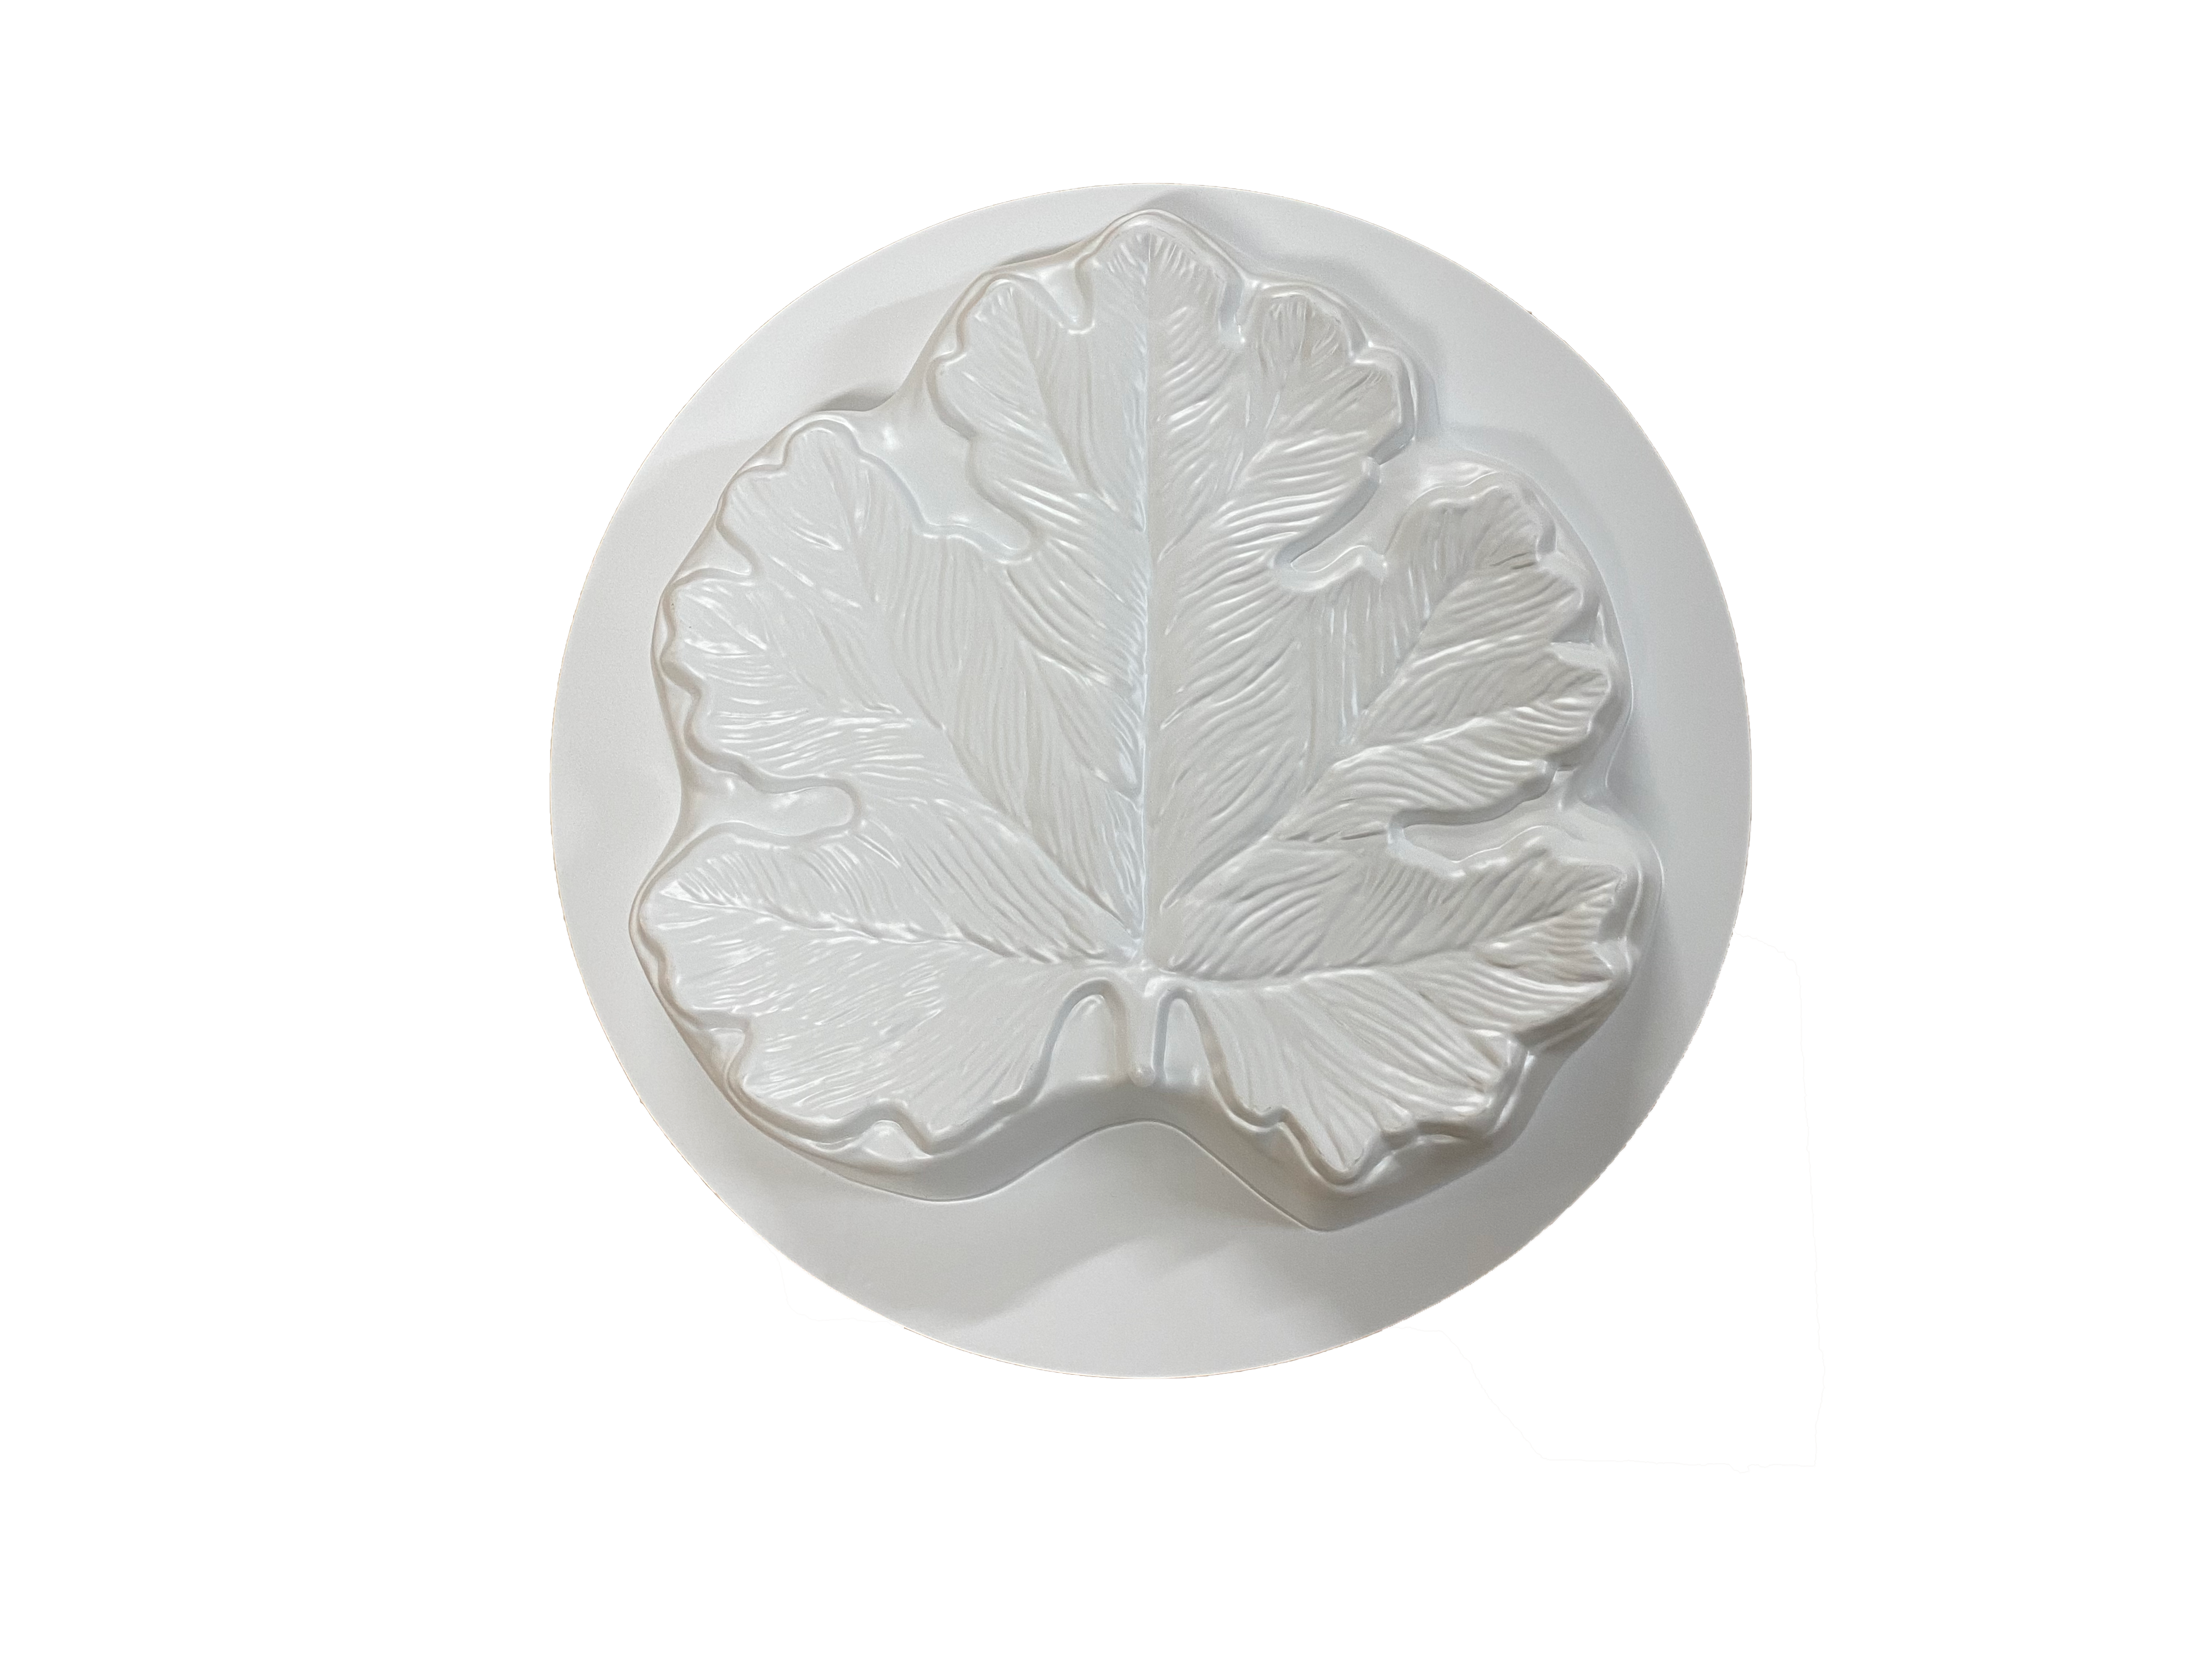 Leaf stepping stone mold 12.5" x 8" x 1" plaster concrete reusable casting mould 